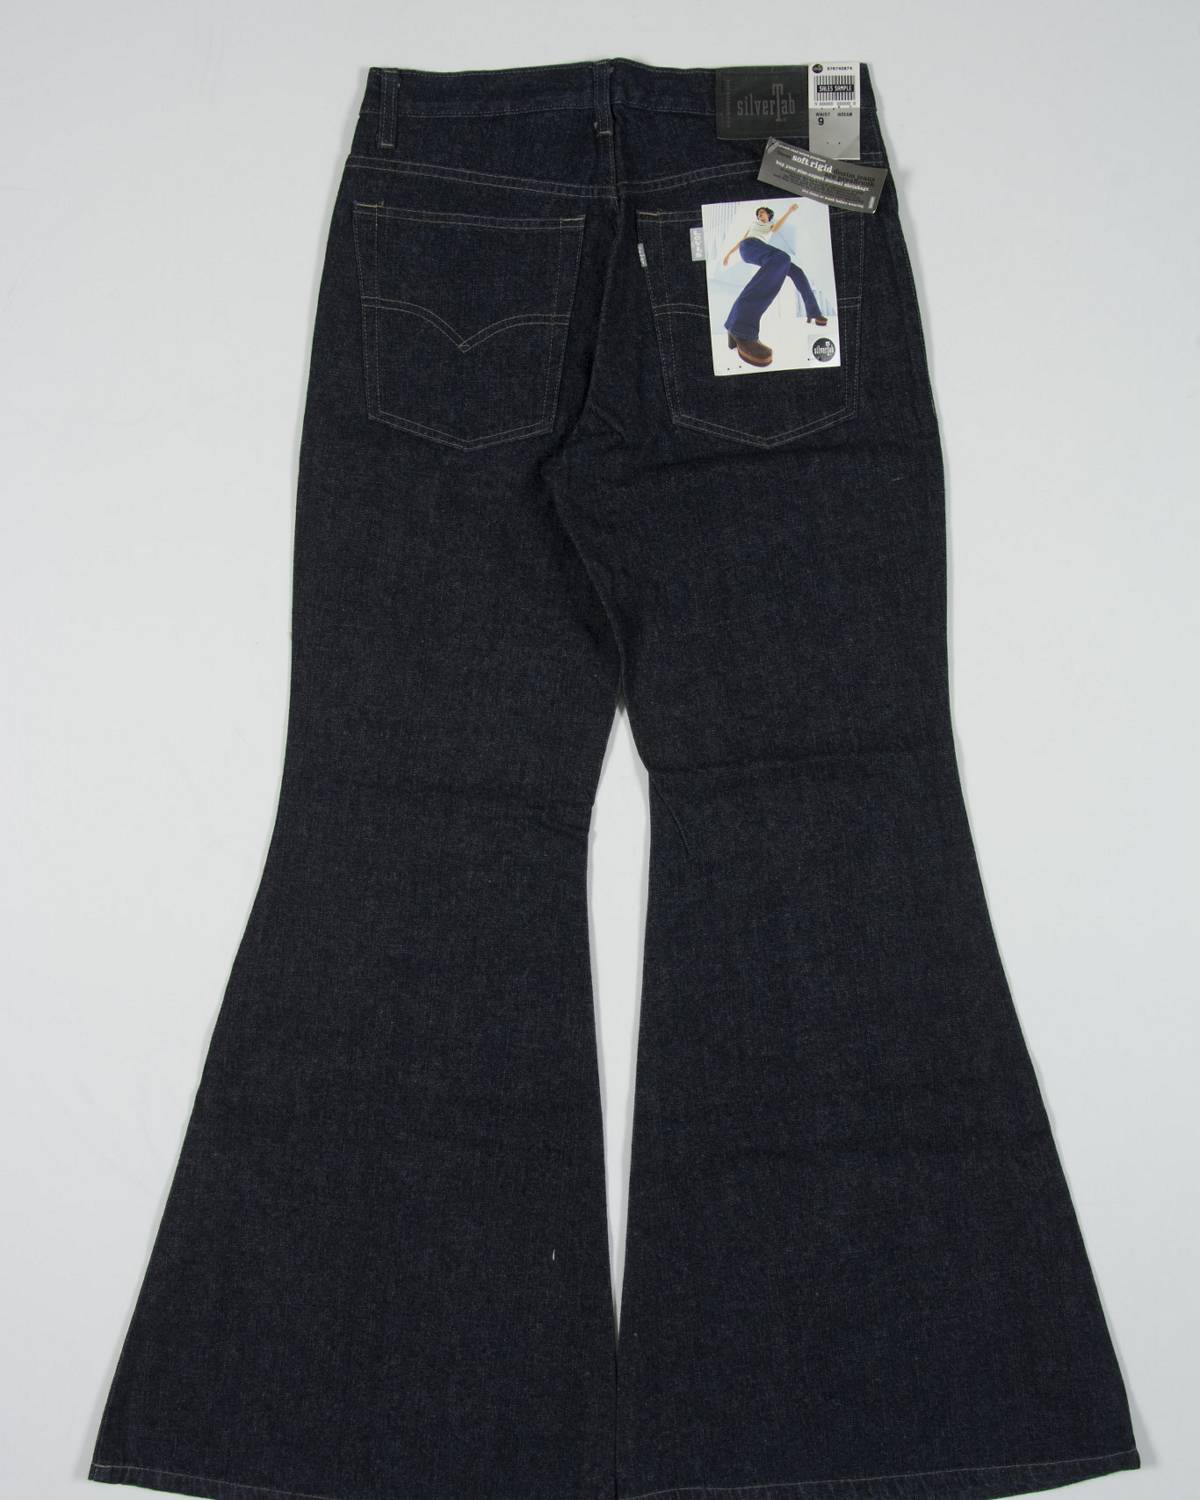 Silver Tab bell bottoms, 1990s